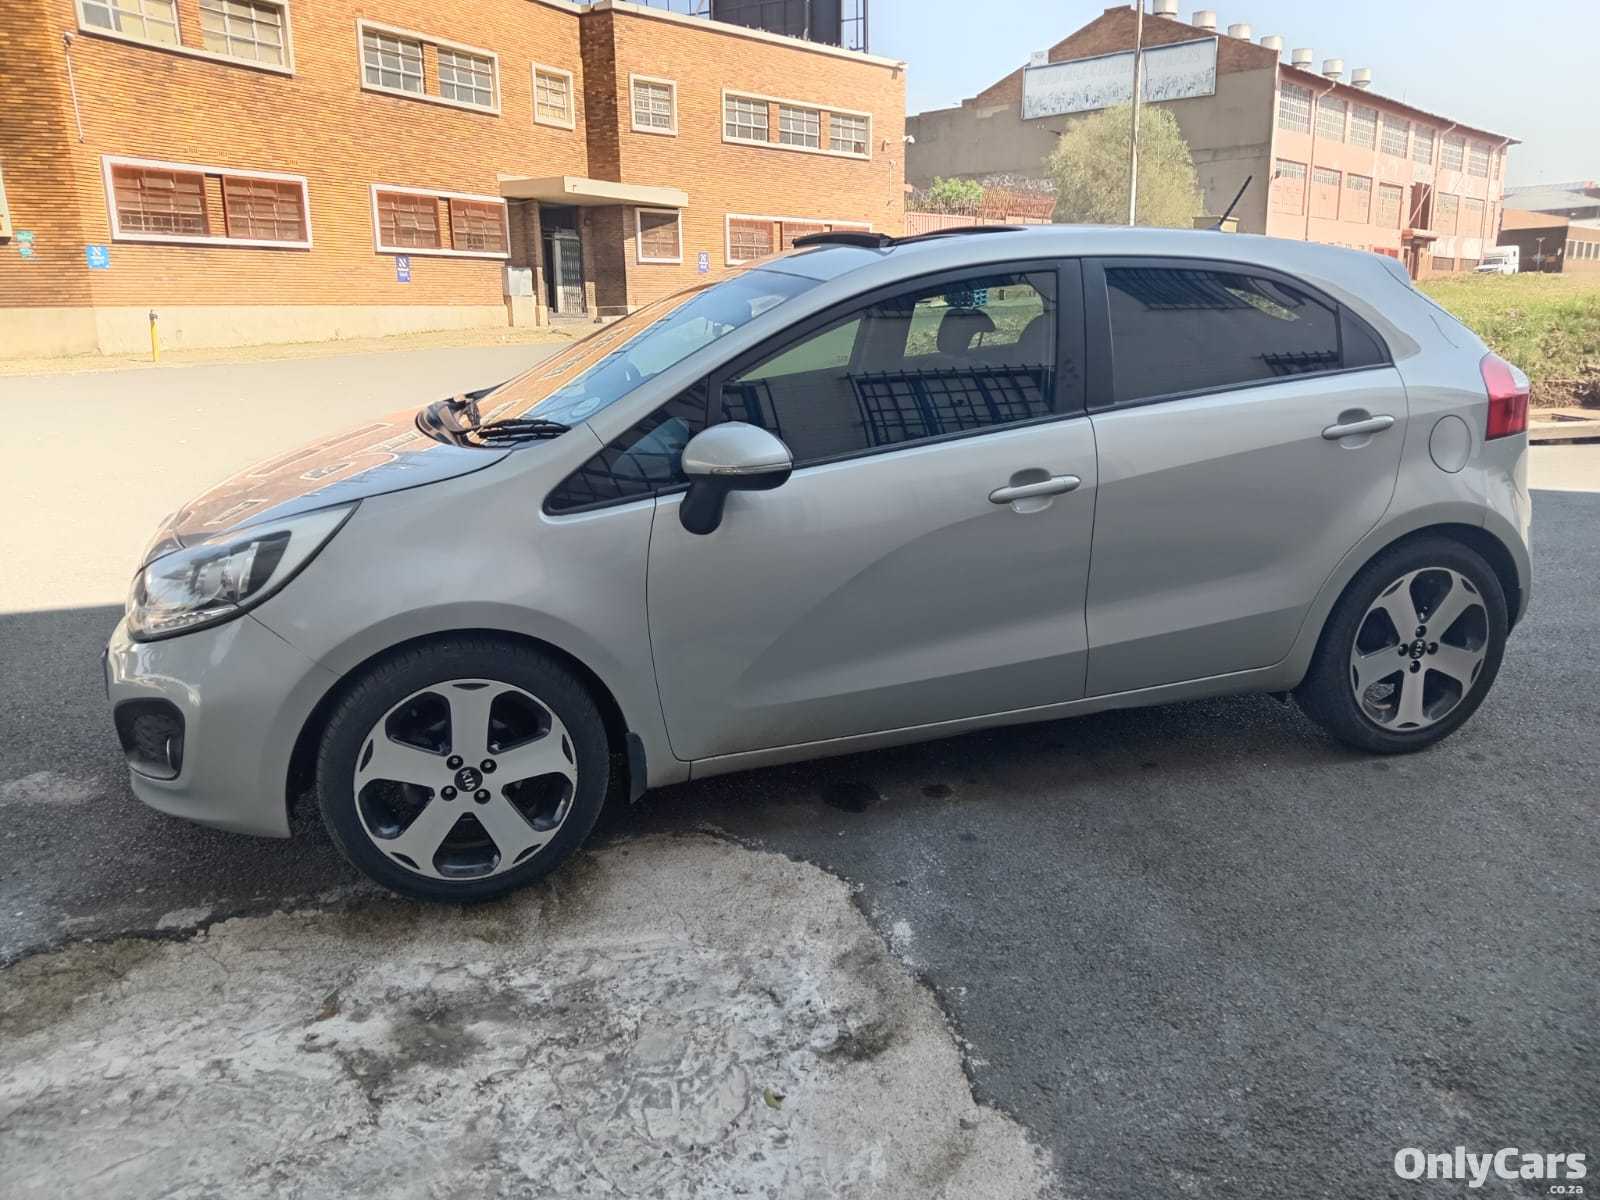 2013 Kia Rio TEC SUNROOF used car for sale in Johannesburg City Gauteng South Africa - OnlyCars.co.za